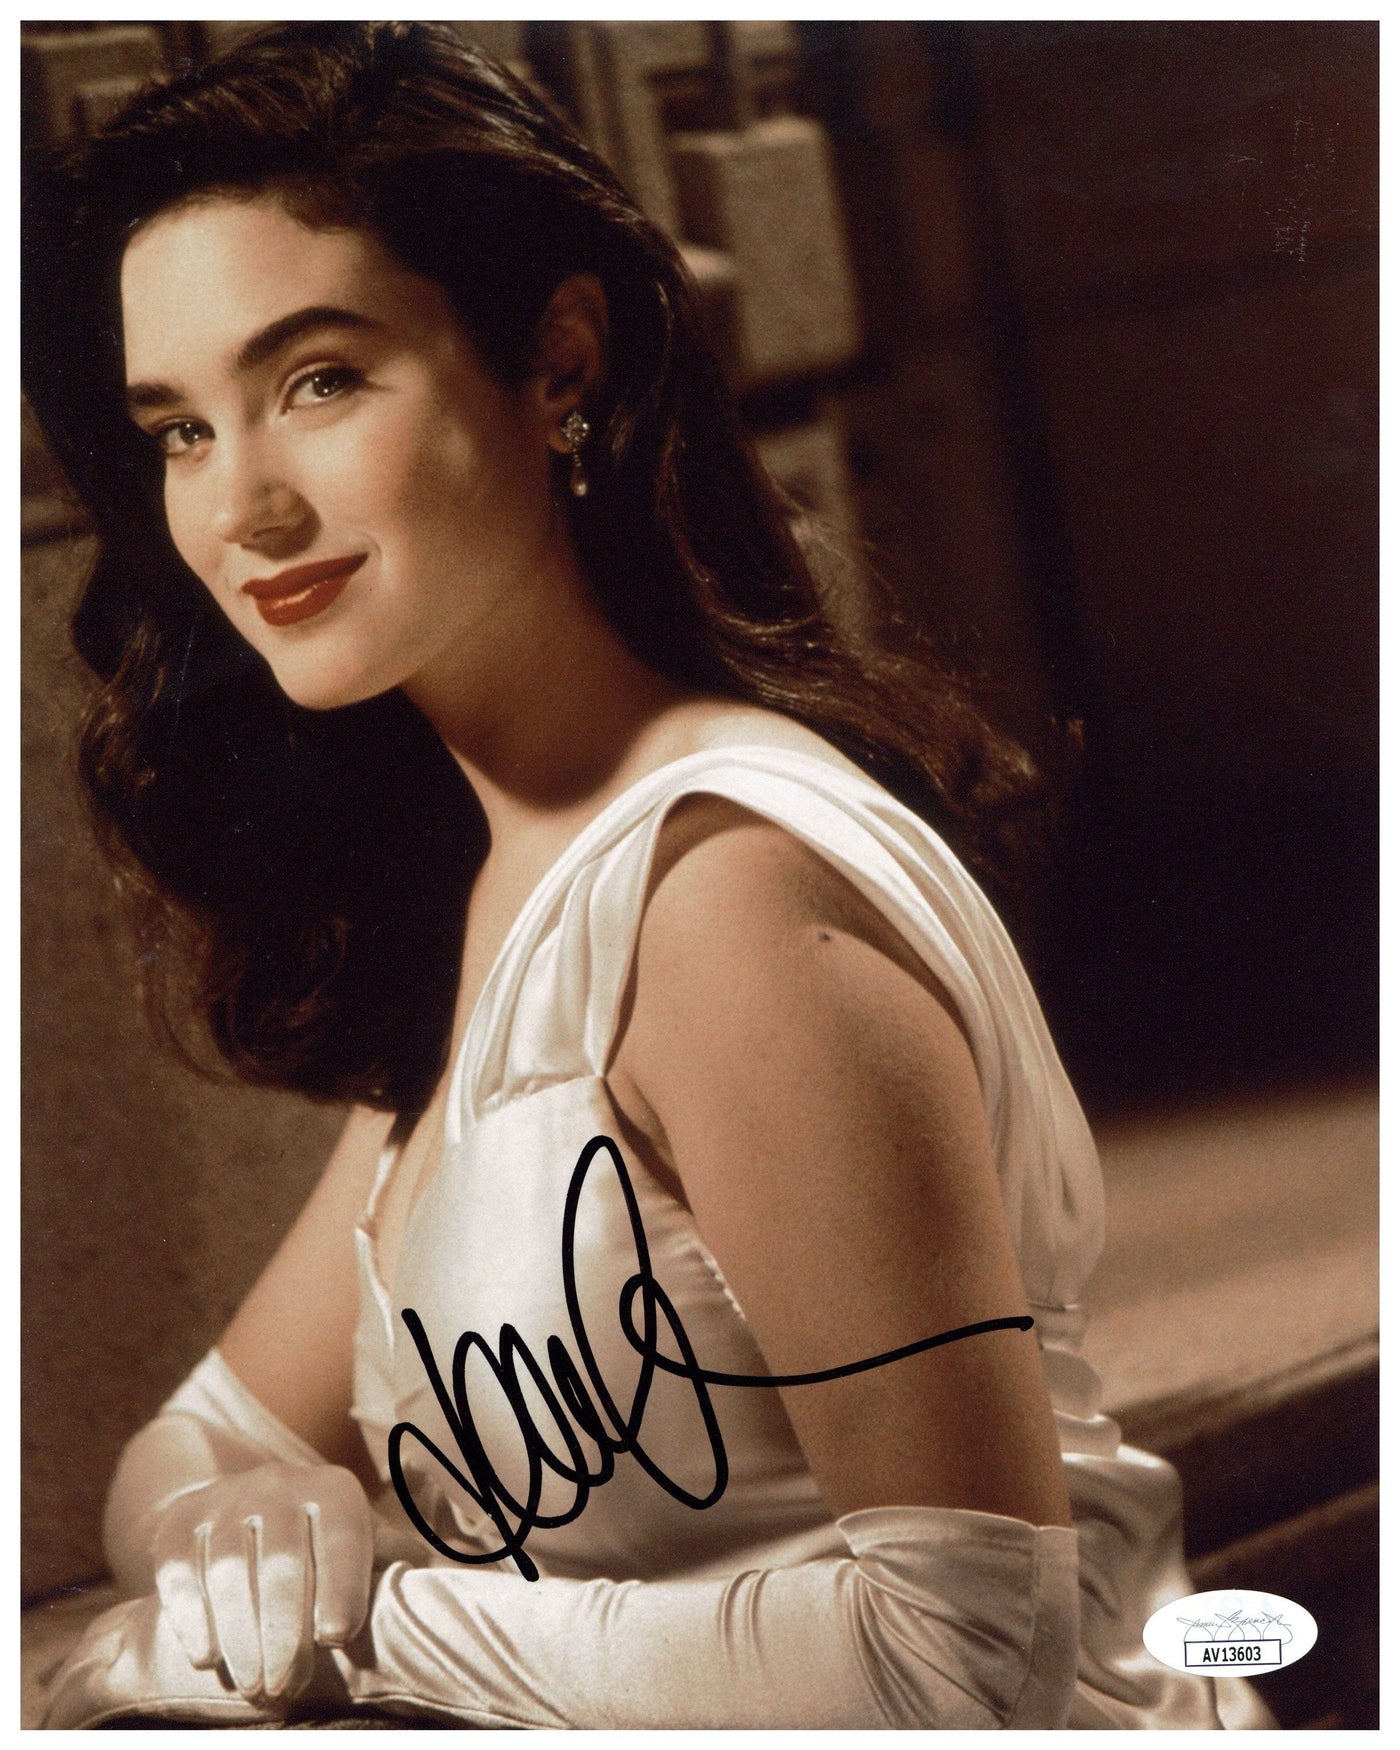 Jennifer Connelly Signed 8x10 Photo The Rocketeer Autographed JSA COA